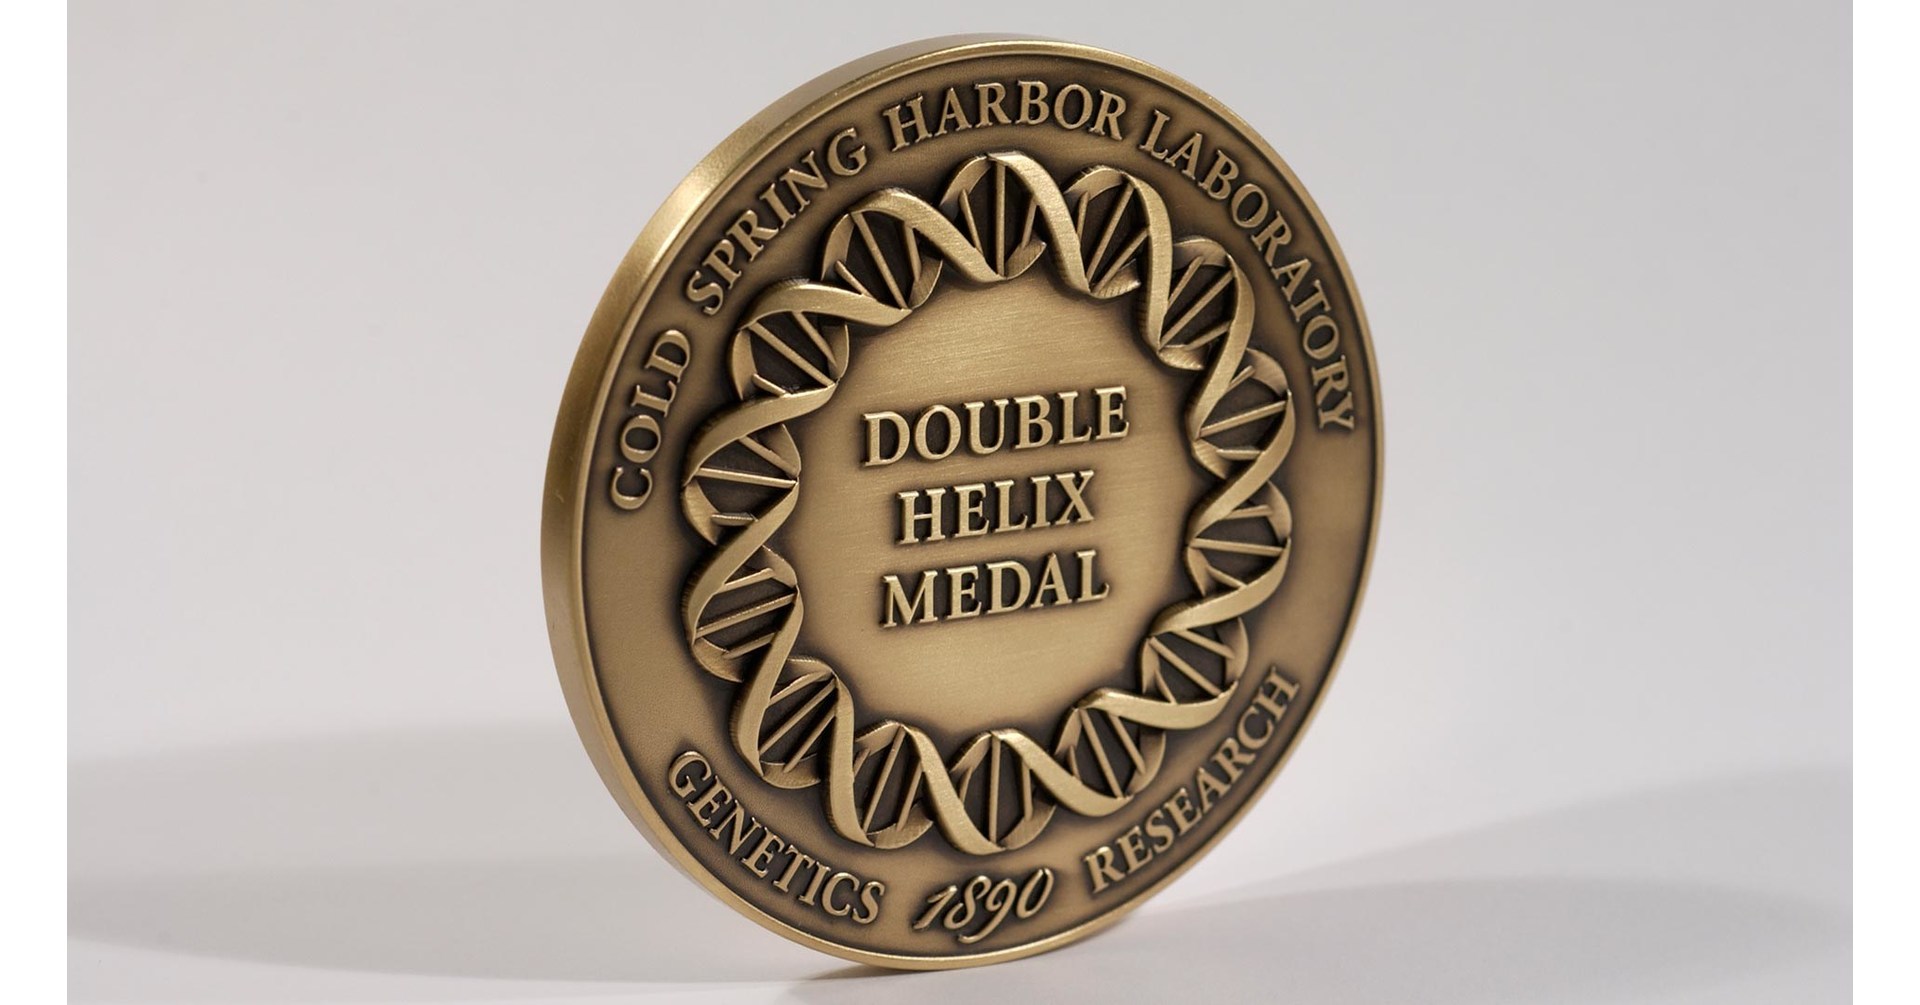 15th annual double helix medals goes virtual